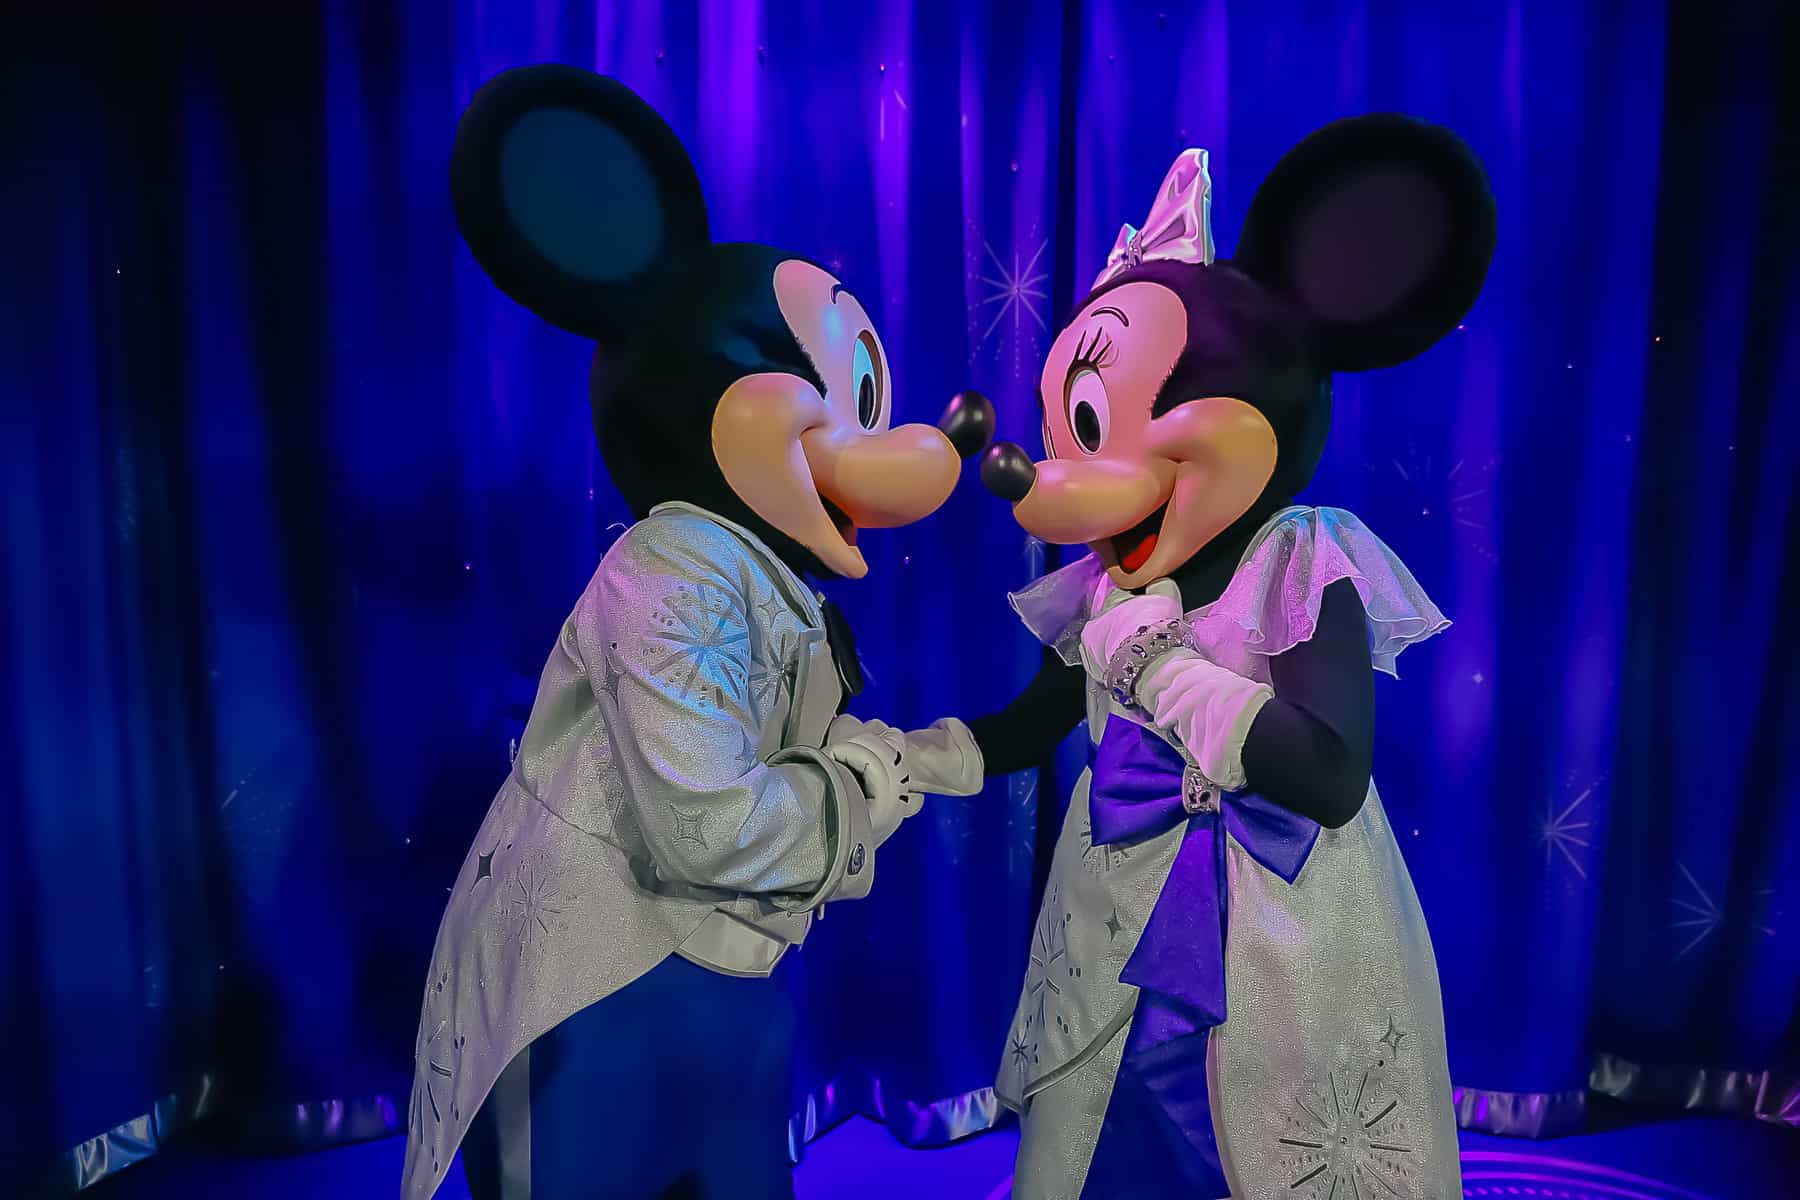 Mickey and Minnie sharing a moment. 